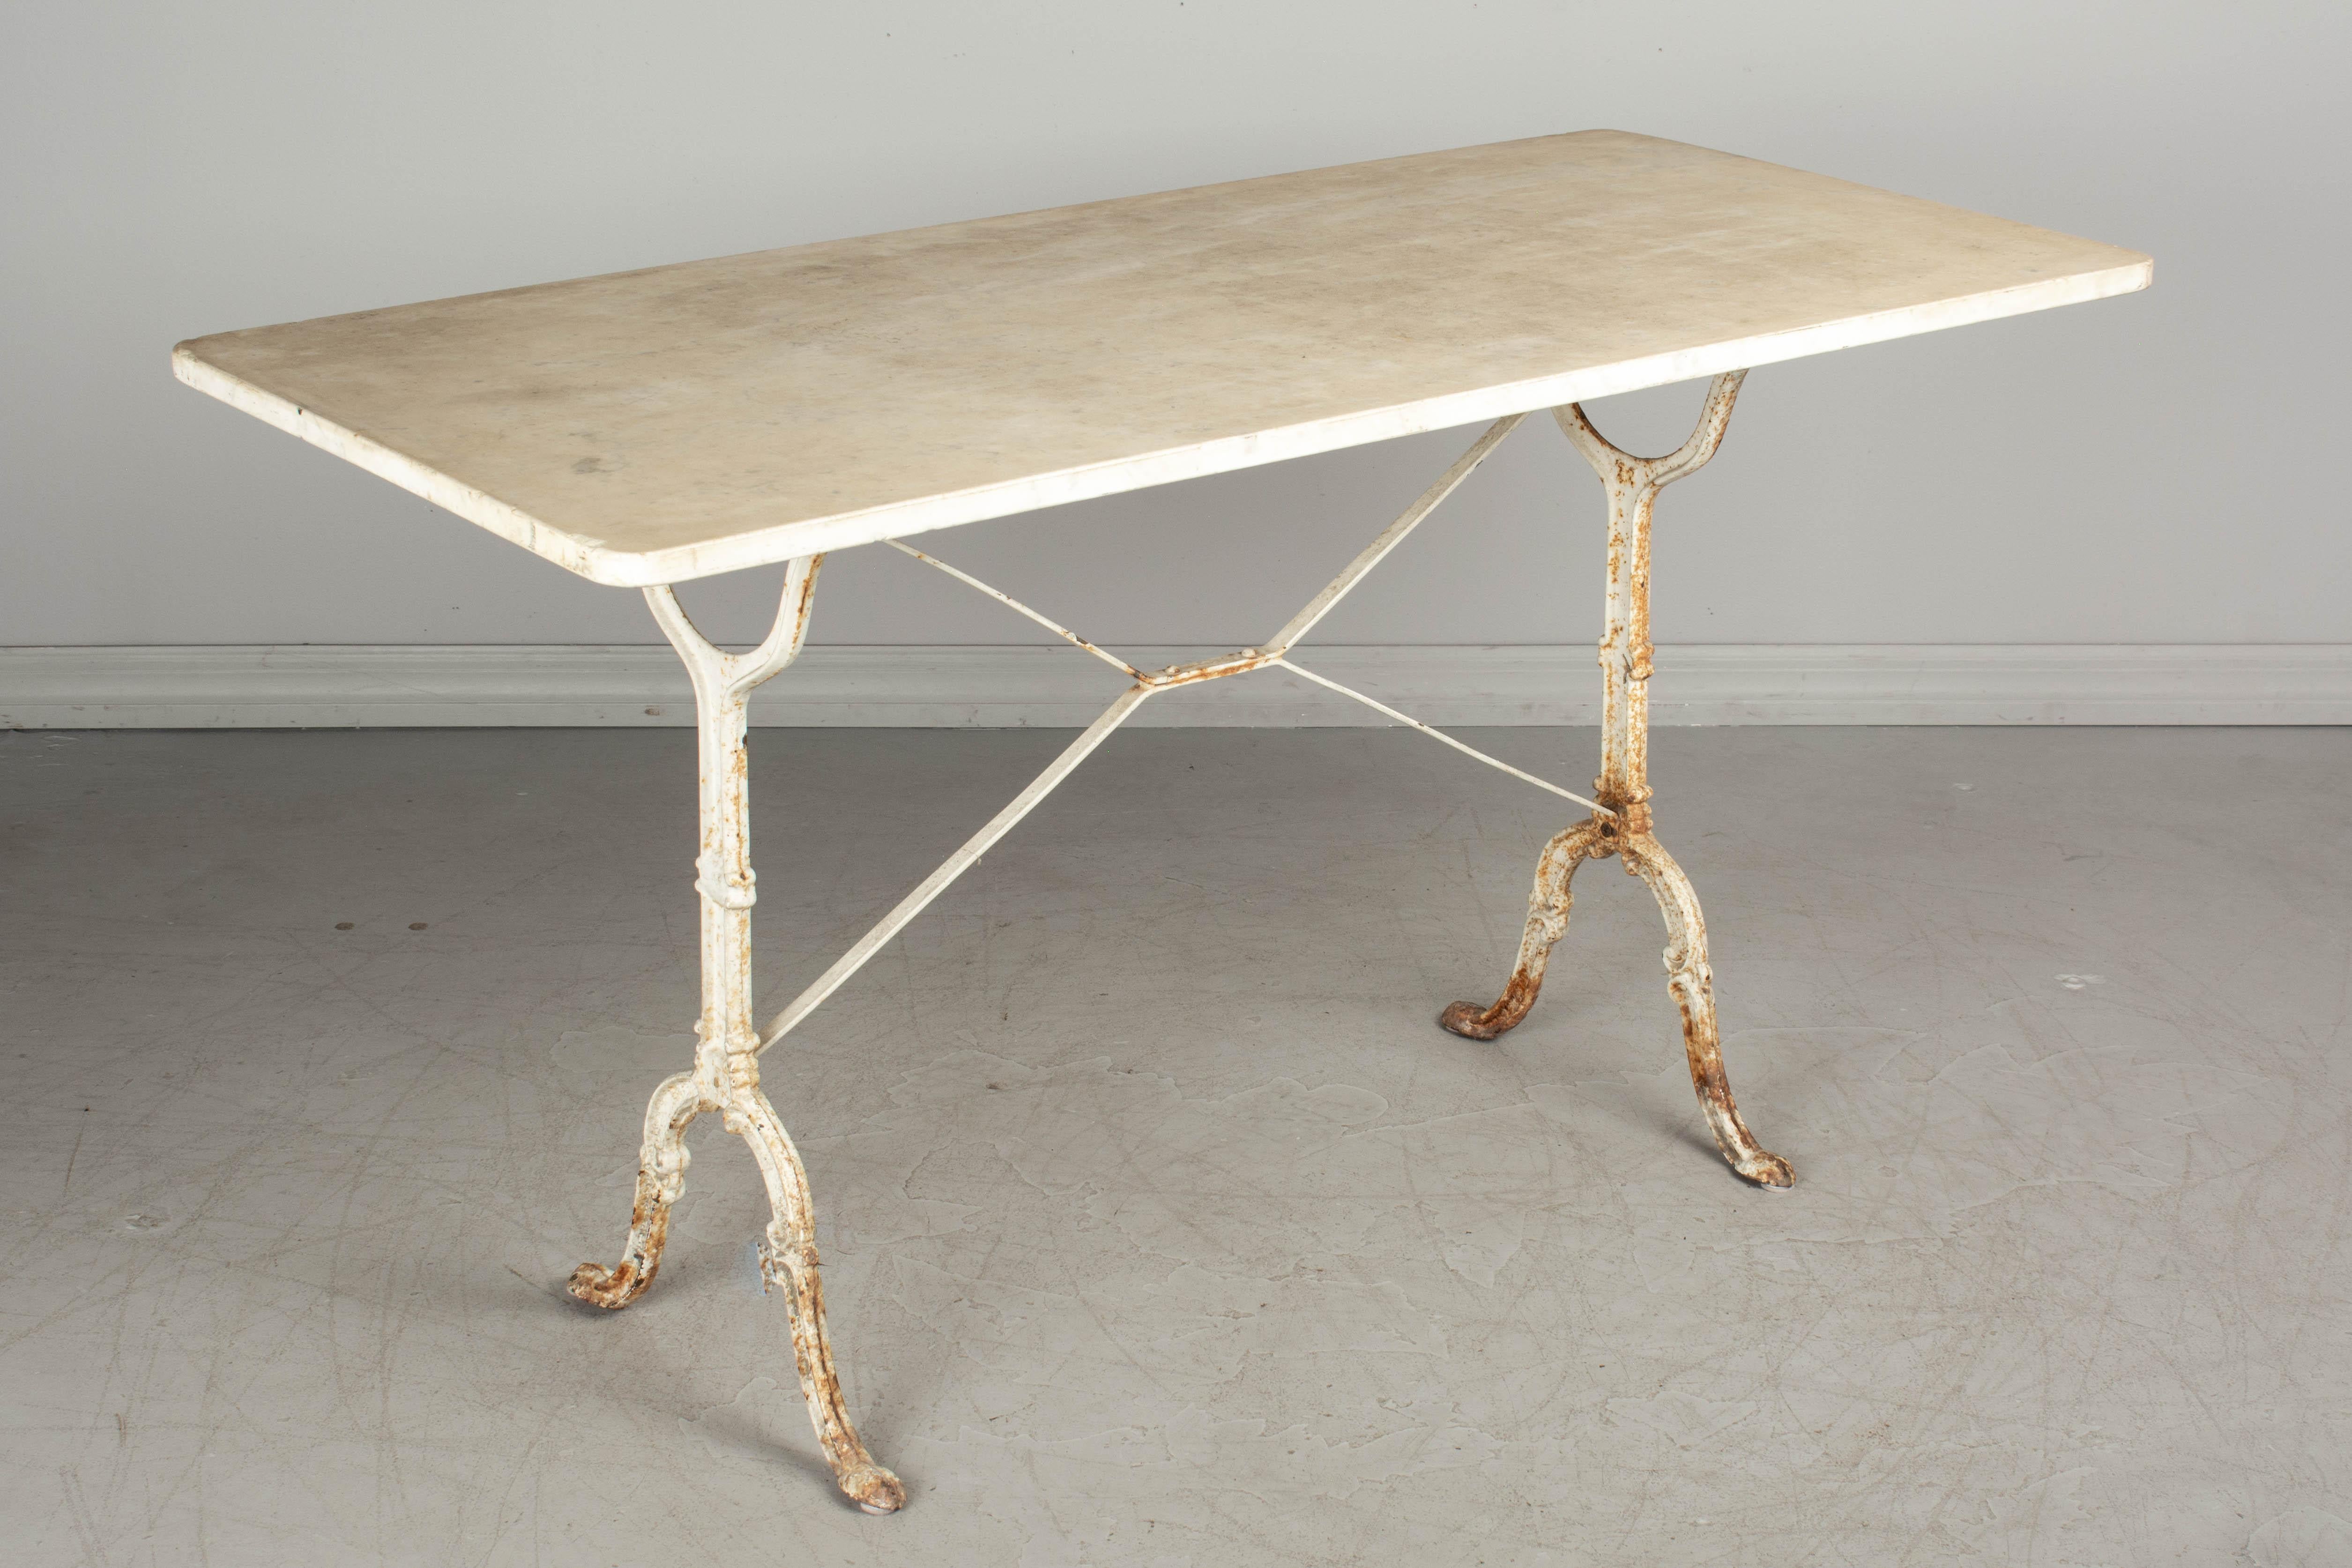 A French cast iron marble top bistro table. Base has old white painted finish with rusty patches. The large marble top is as found with the base and has a beautiful worn patina. Several chips to the edges of the marble. Perfect for outdoor.